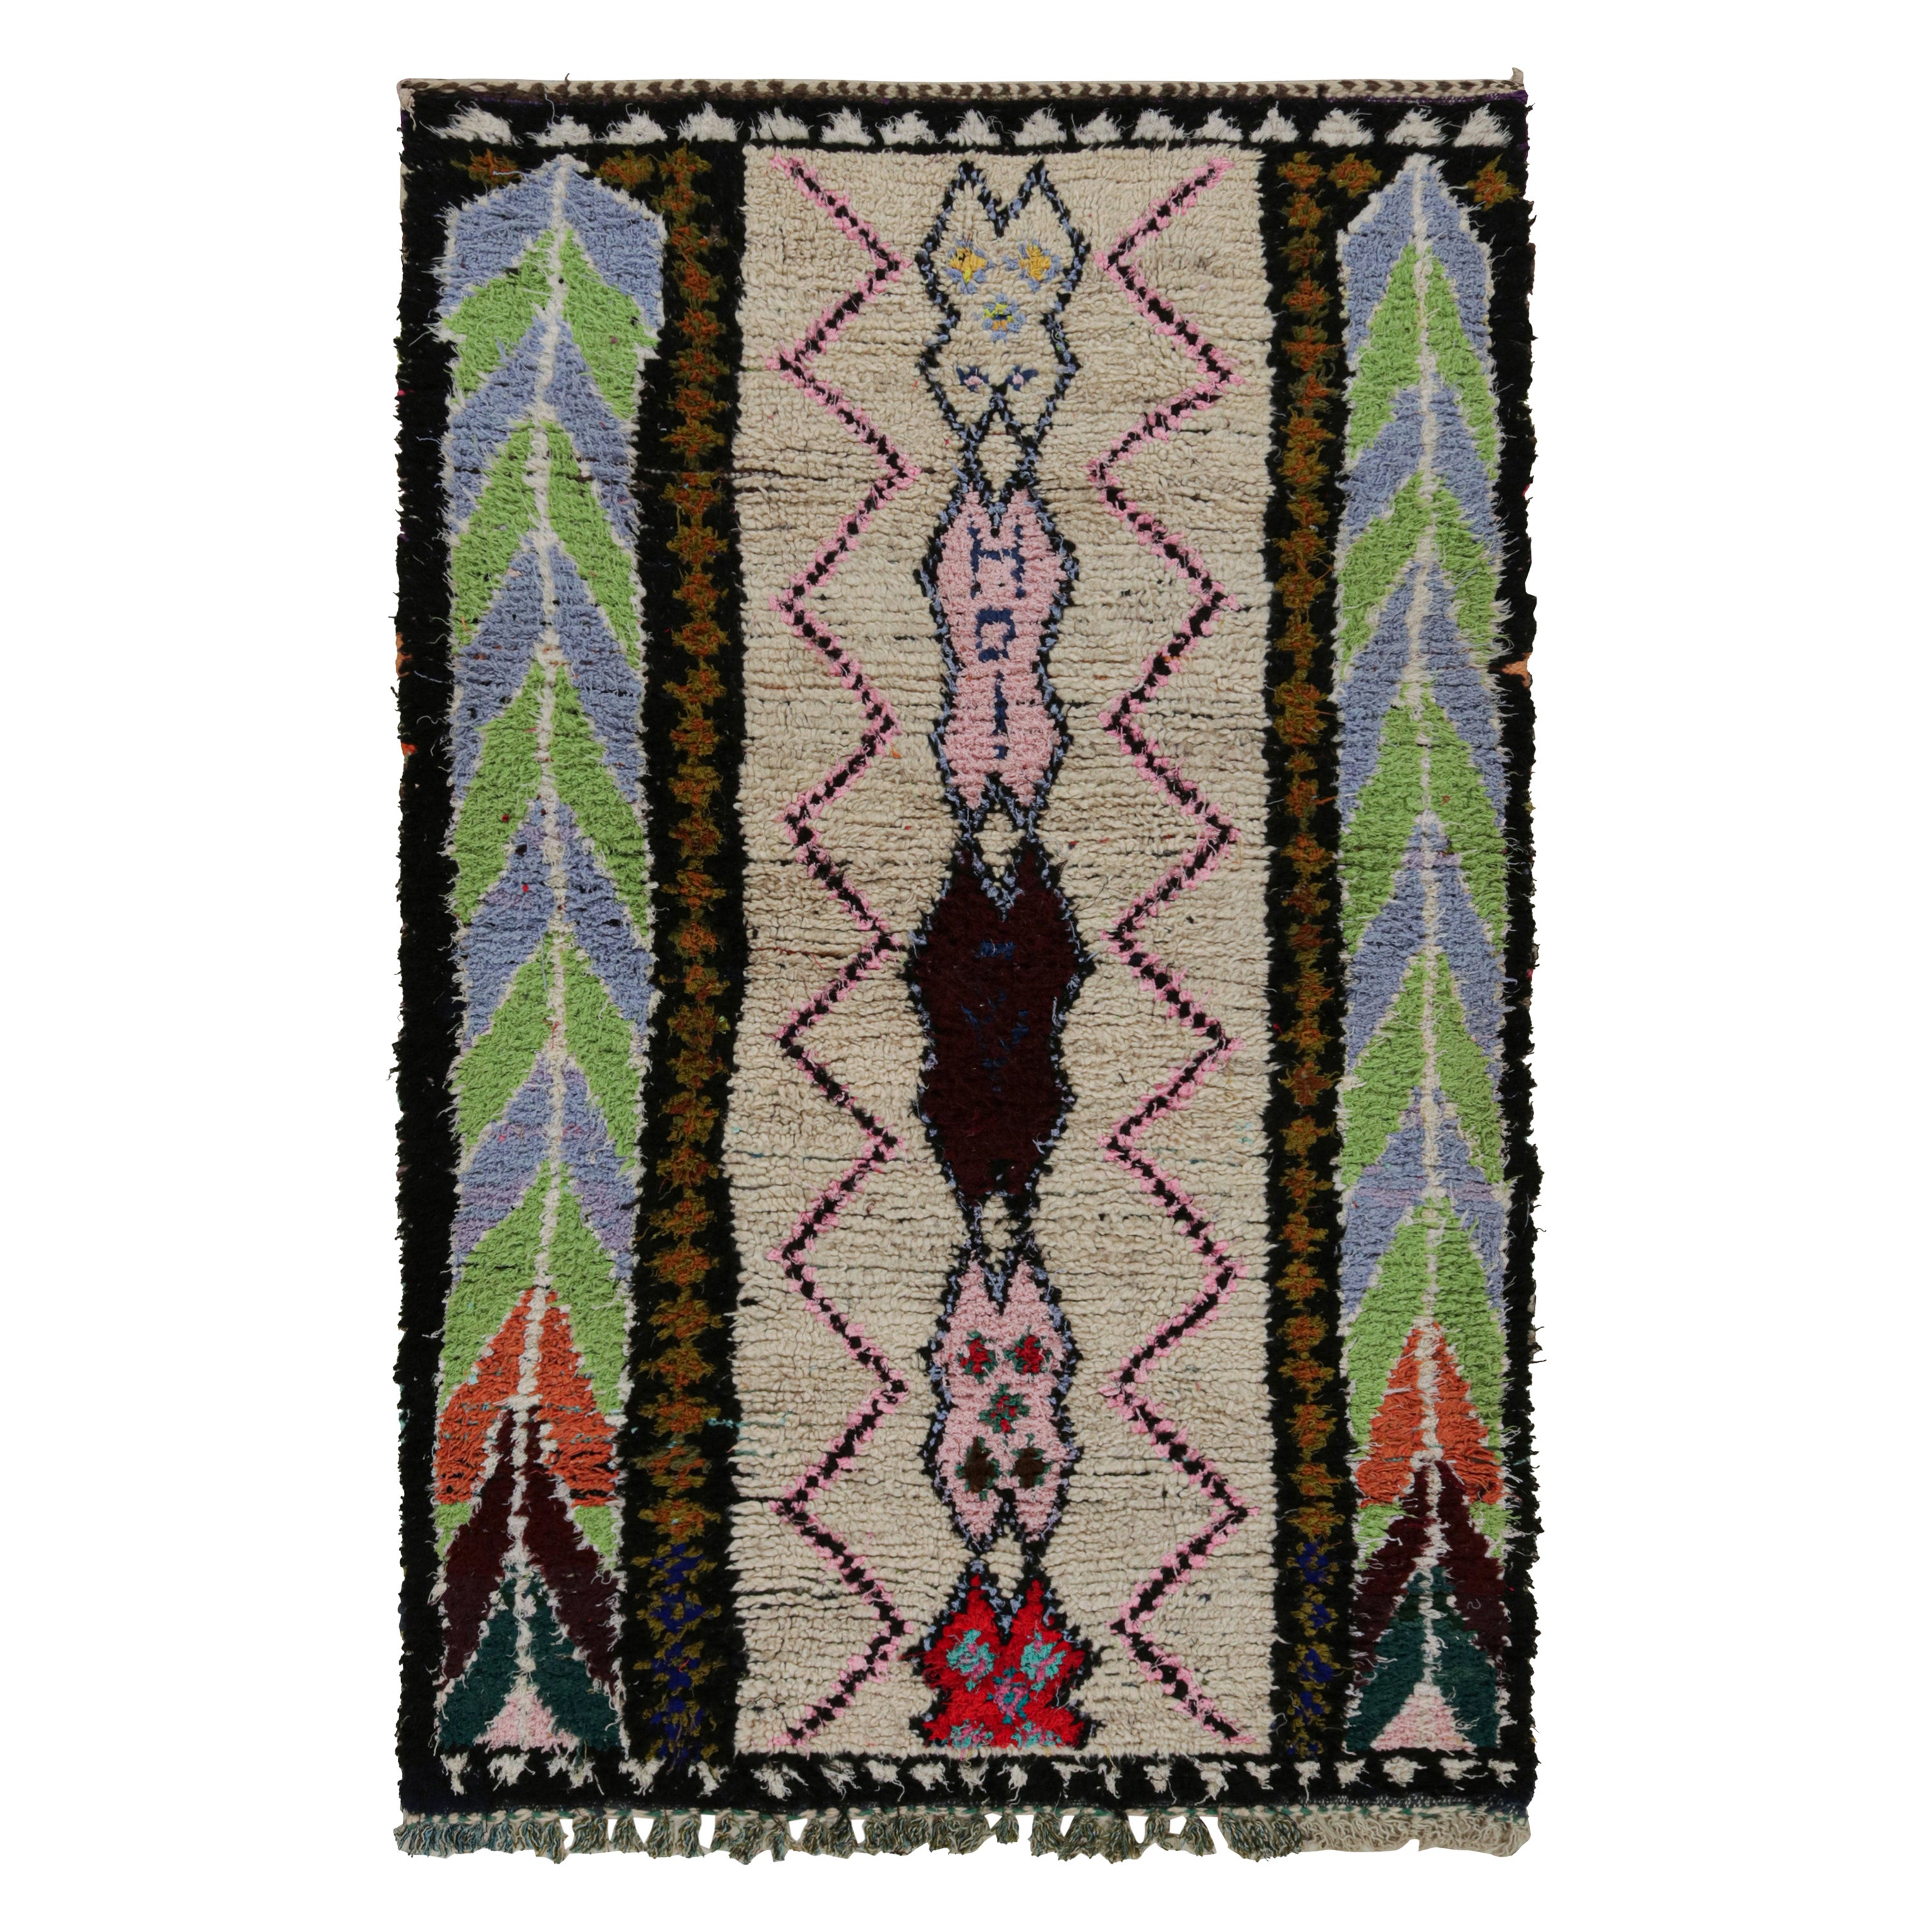 Vintage Moroccan Rug with Polychromatic Geometric Patterns, from Rug & Kilim  For Sale